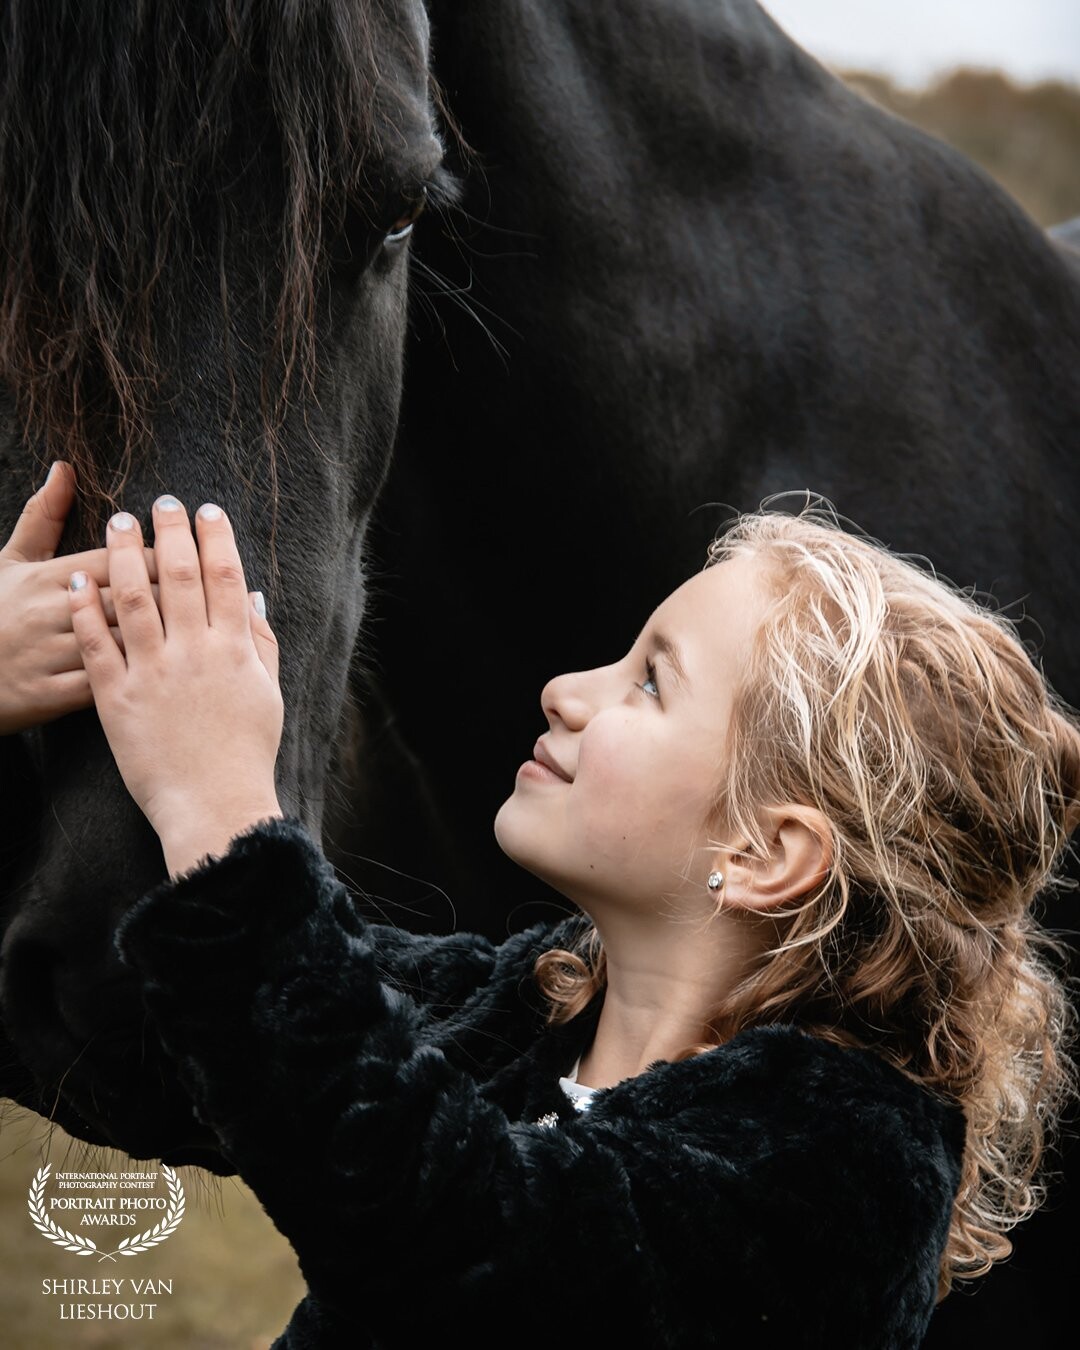 My daughter Fleur meeting big Friesian Anna for the first time. Fleur first impressed by the size and greatness of Anna but soon she dared to cuddle and stand next to her so this beautiful picture could be made.